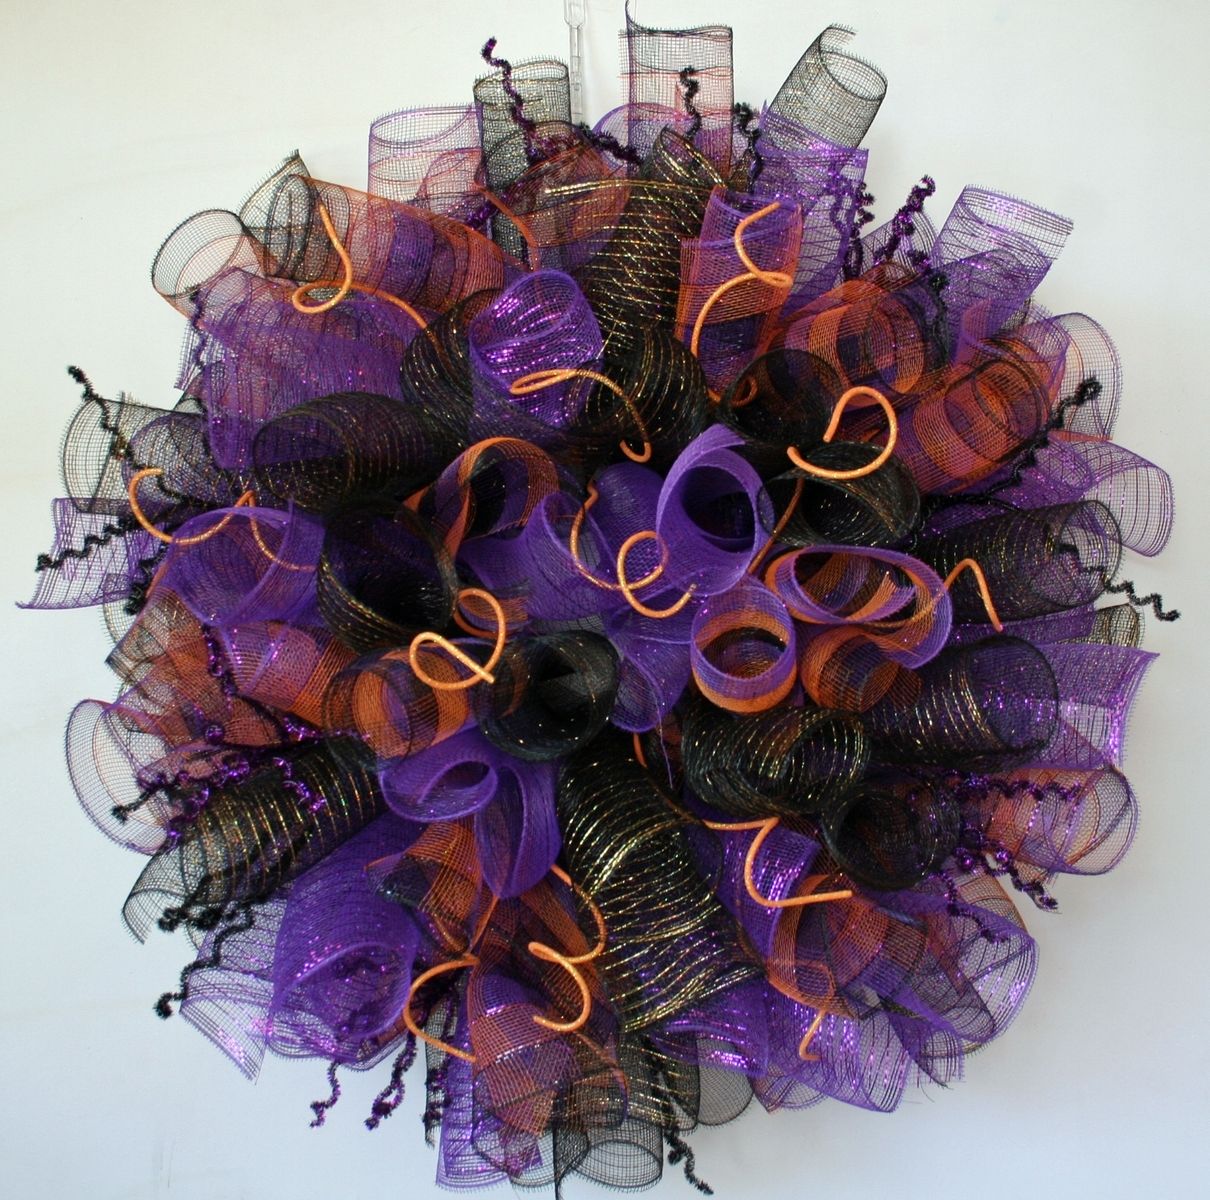 Hand Crafted Curled Mesh Halloween Wreath by DyJo Designs | CustomMade.com